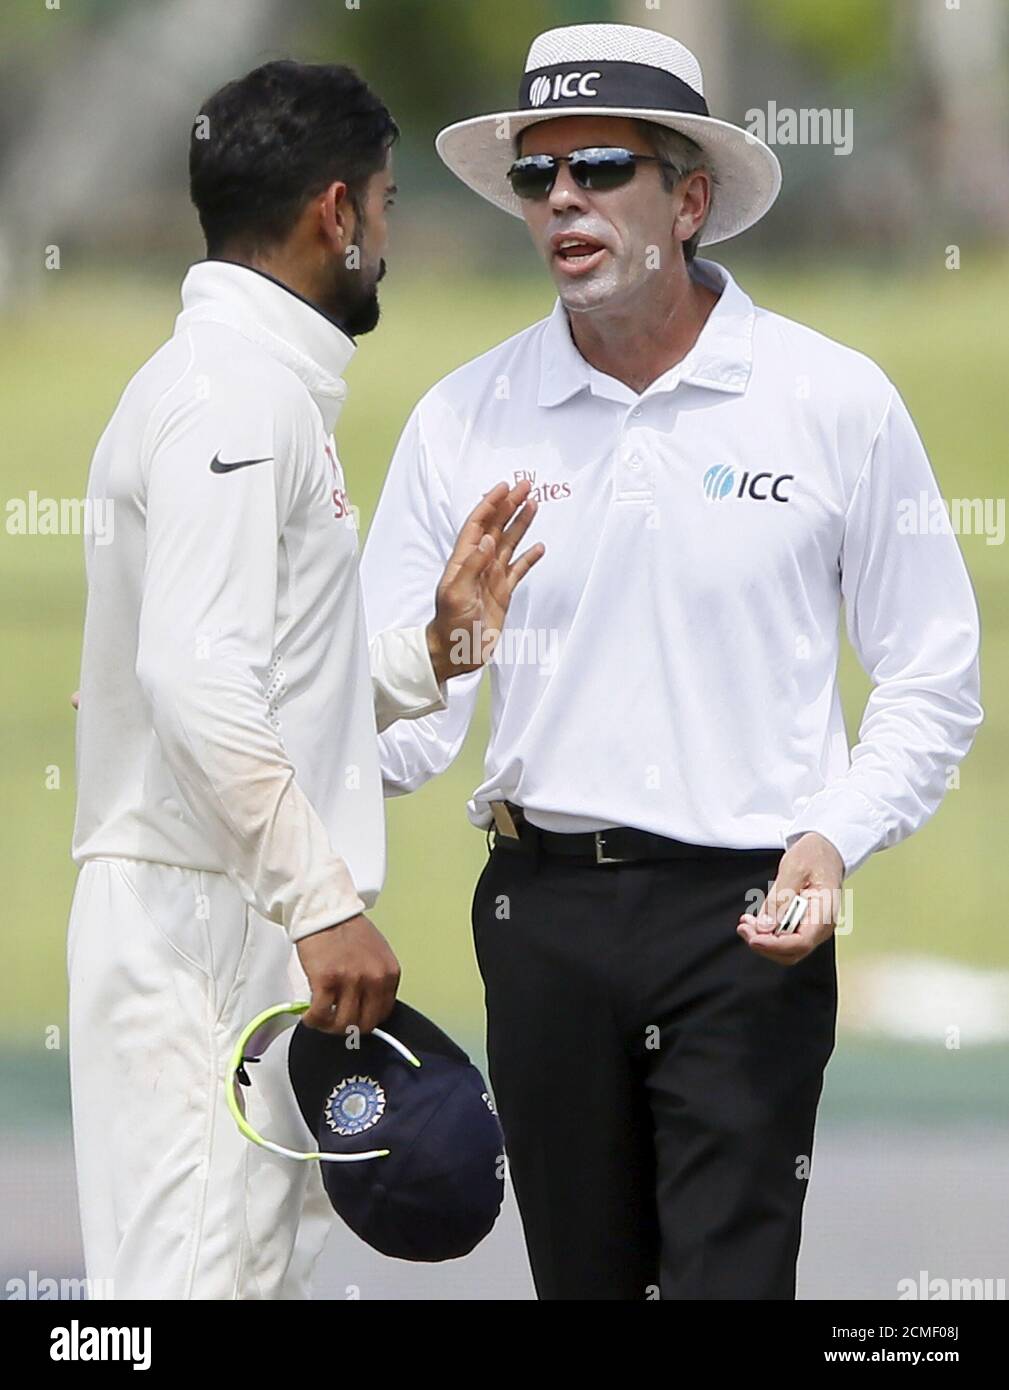 India's captain Virat Kohli (L) talks with umpire Nigel Llong during the final day of their third and final test cricket match against Sri Lanka in Colombo, September 1, 2015. REUTERS/Dinuka Liyanawatte Stock Photo